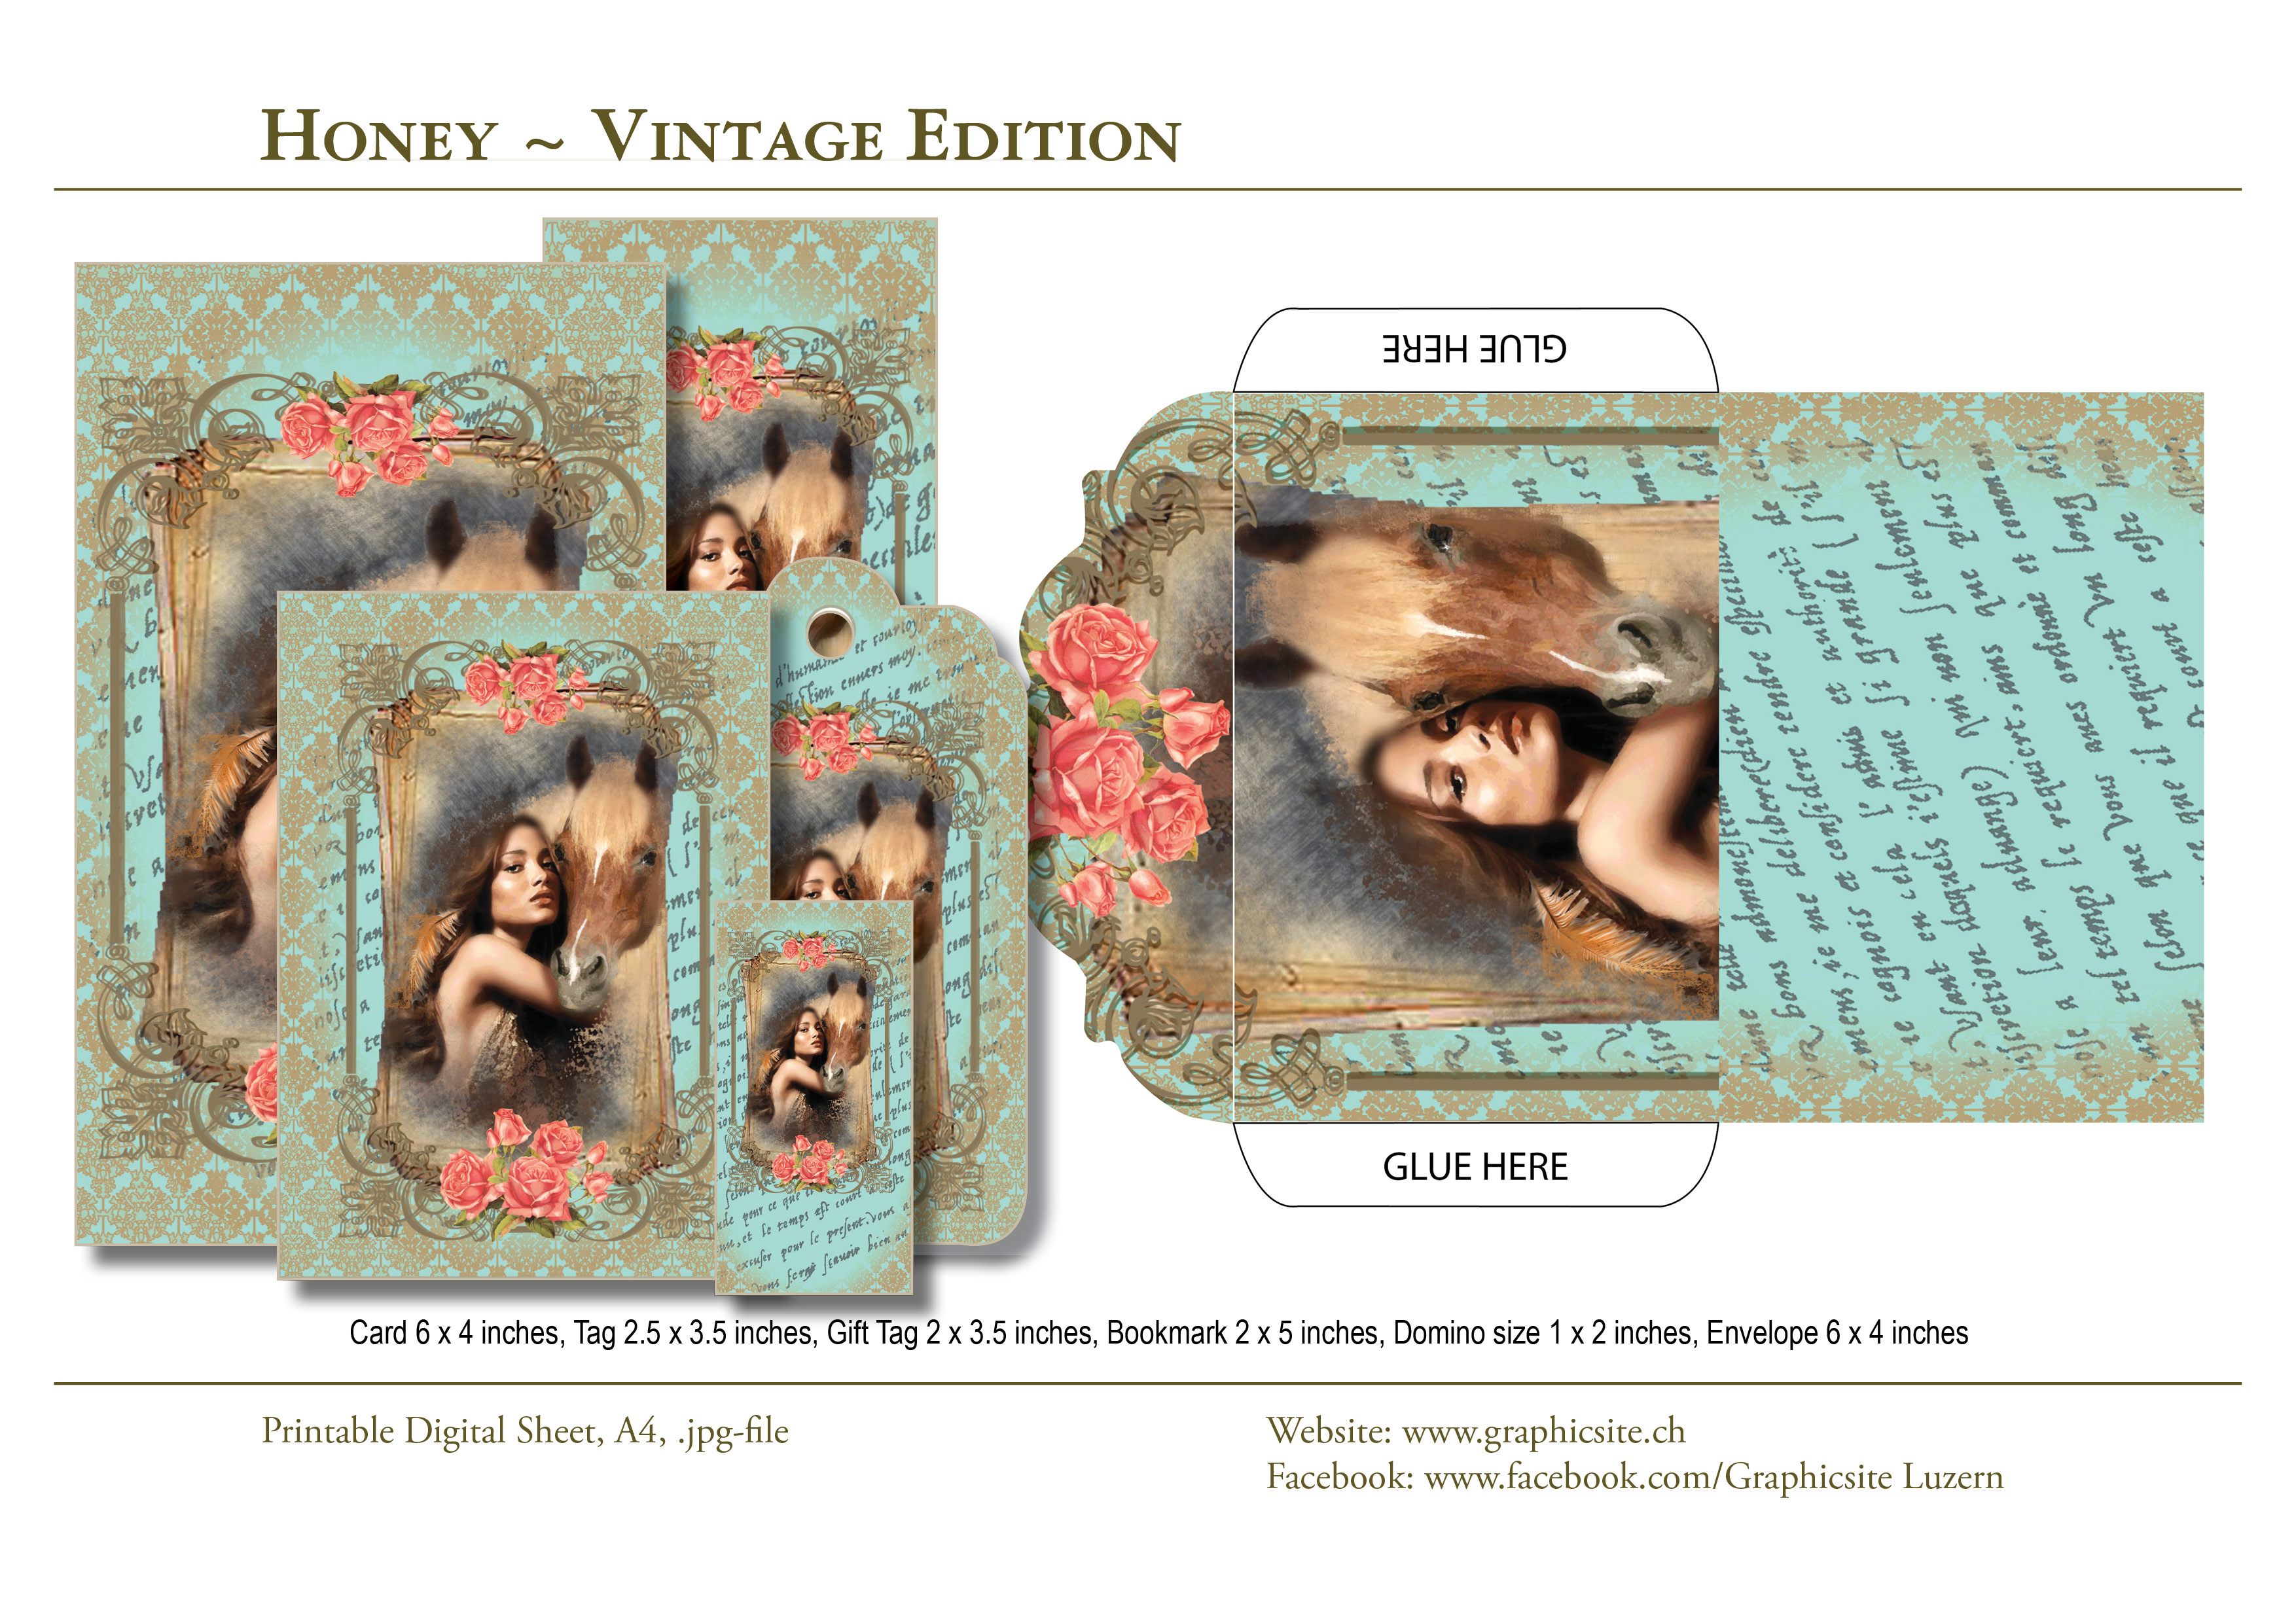 Printable Digital Sheets - Collections - Honey_VintageEdition